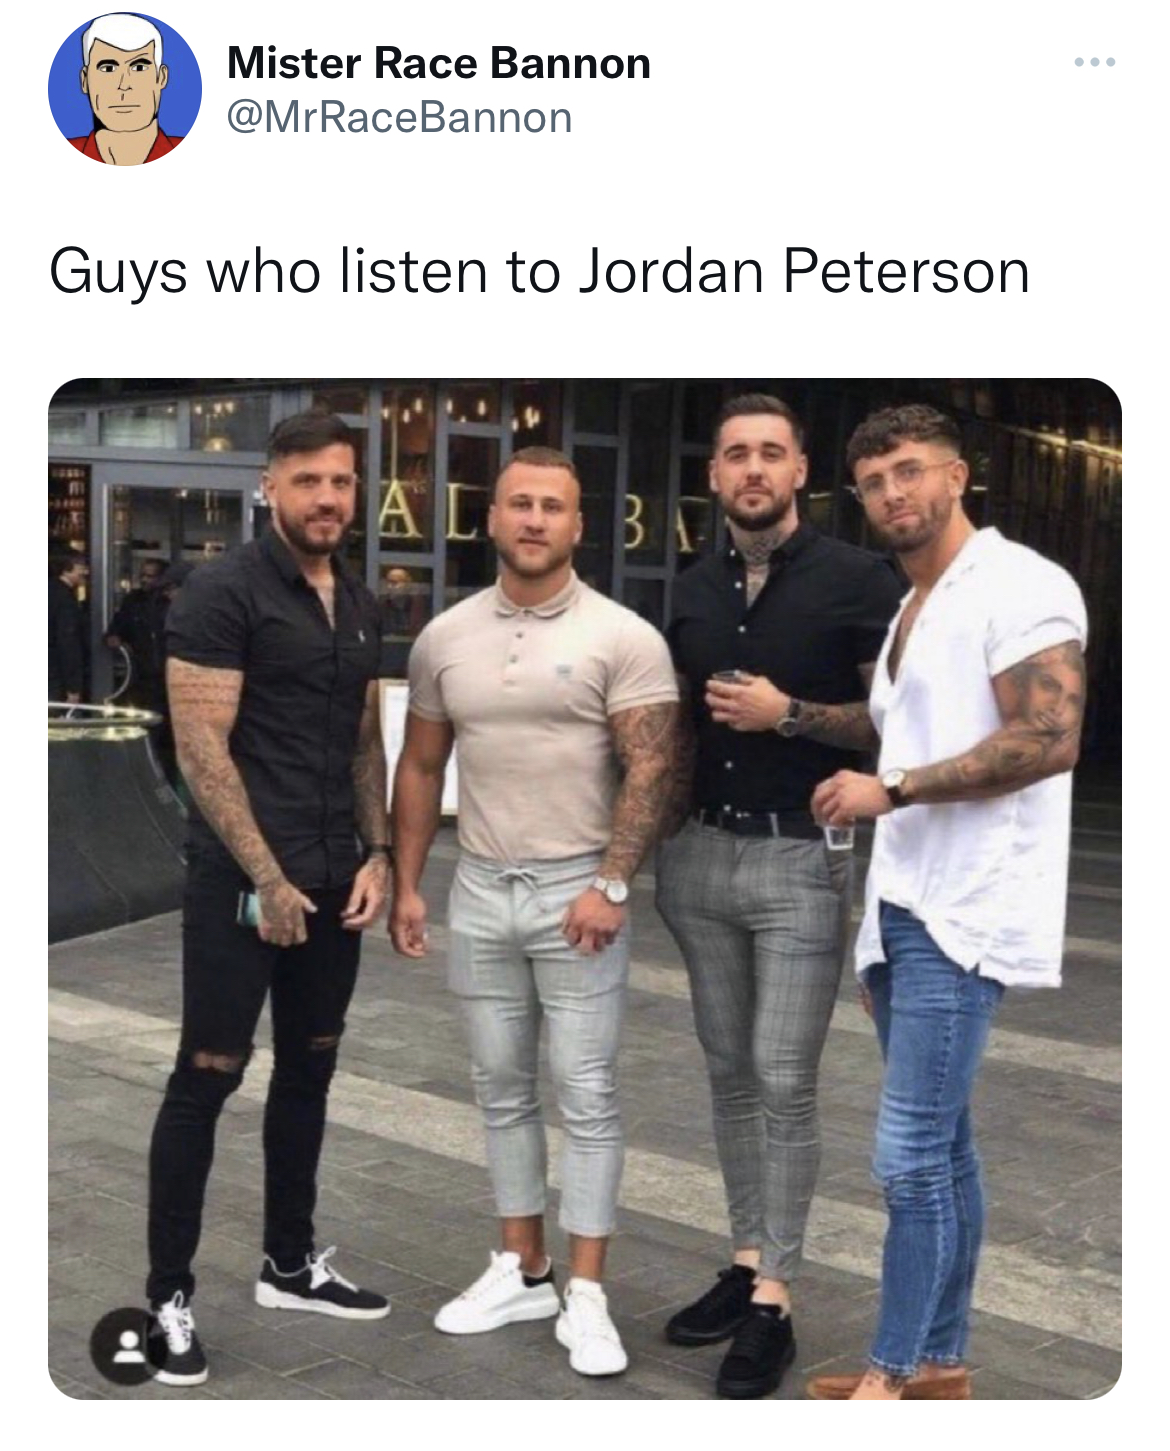 4 lads in jeans statue - Mister Race Bannon Guys who listen to Jordan Peterson 214 Ban